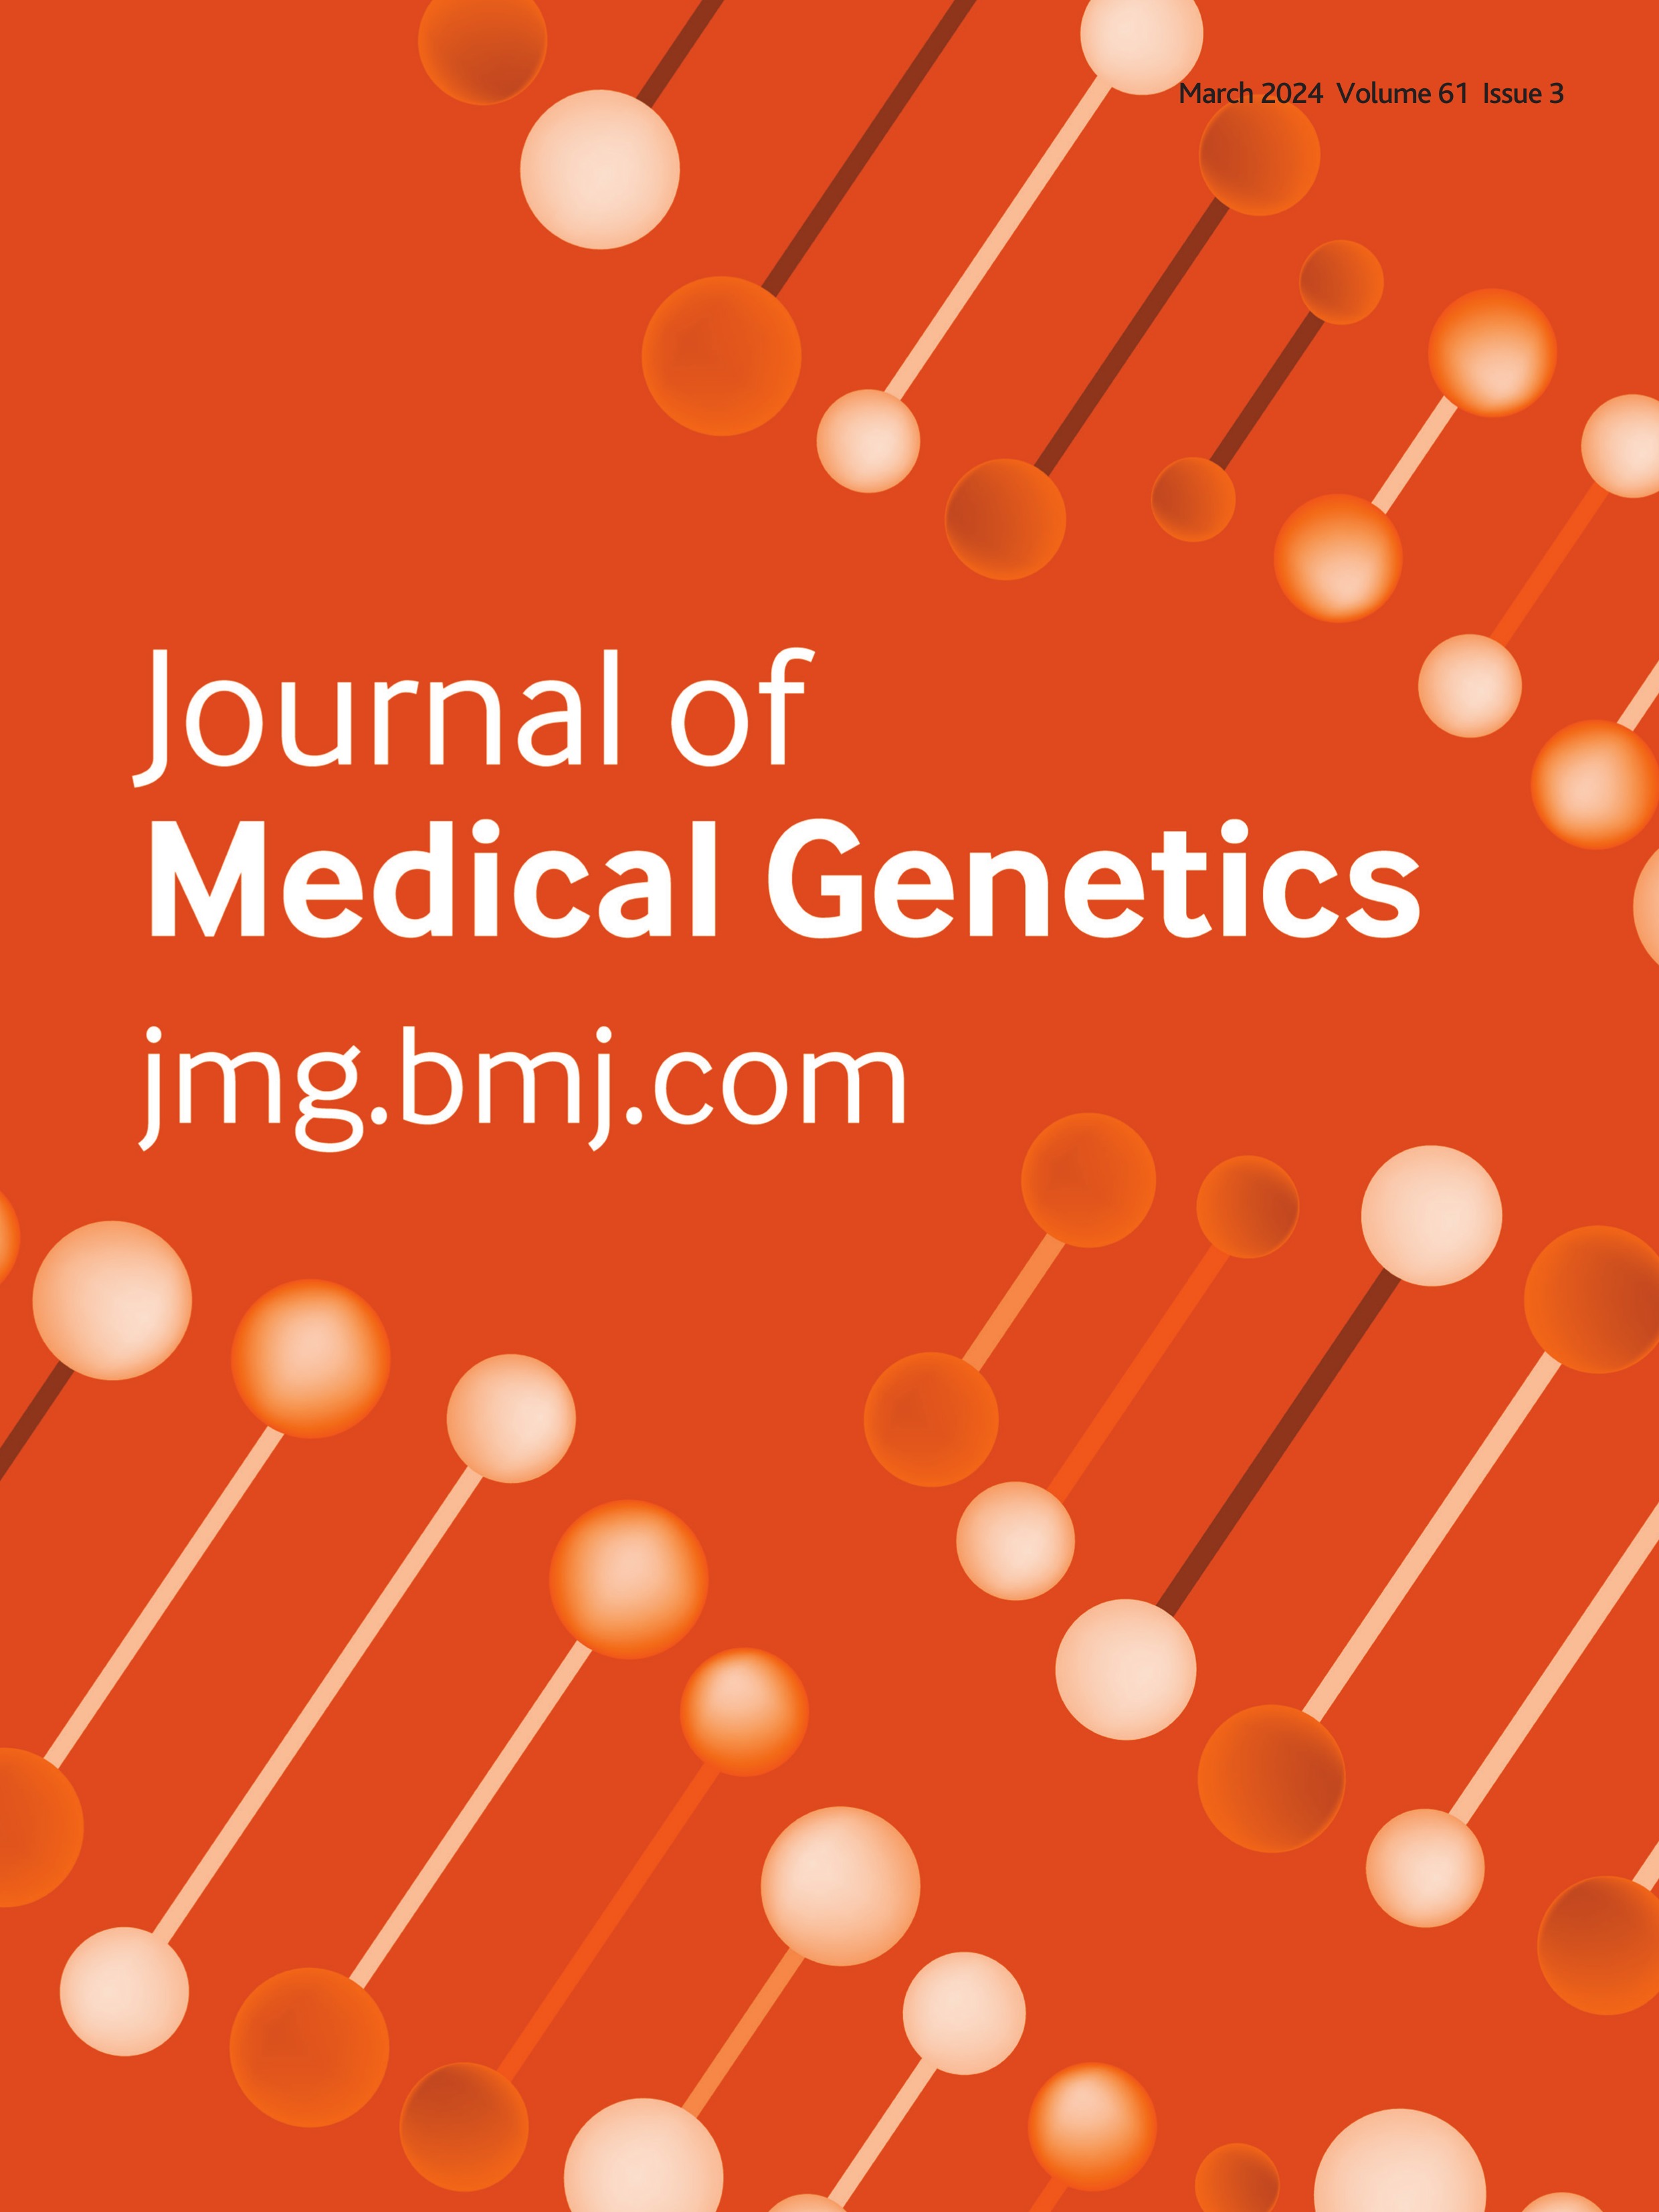 Congenital anaemia associated with loss-of-function variants in DNA polymerase epsilon 1